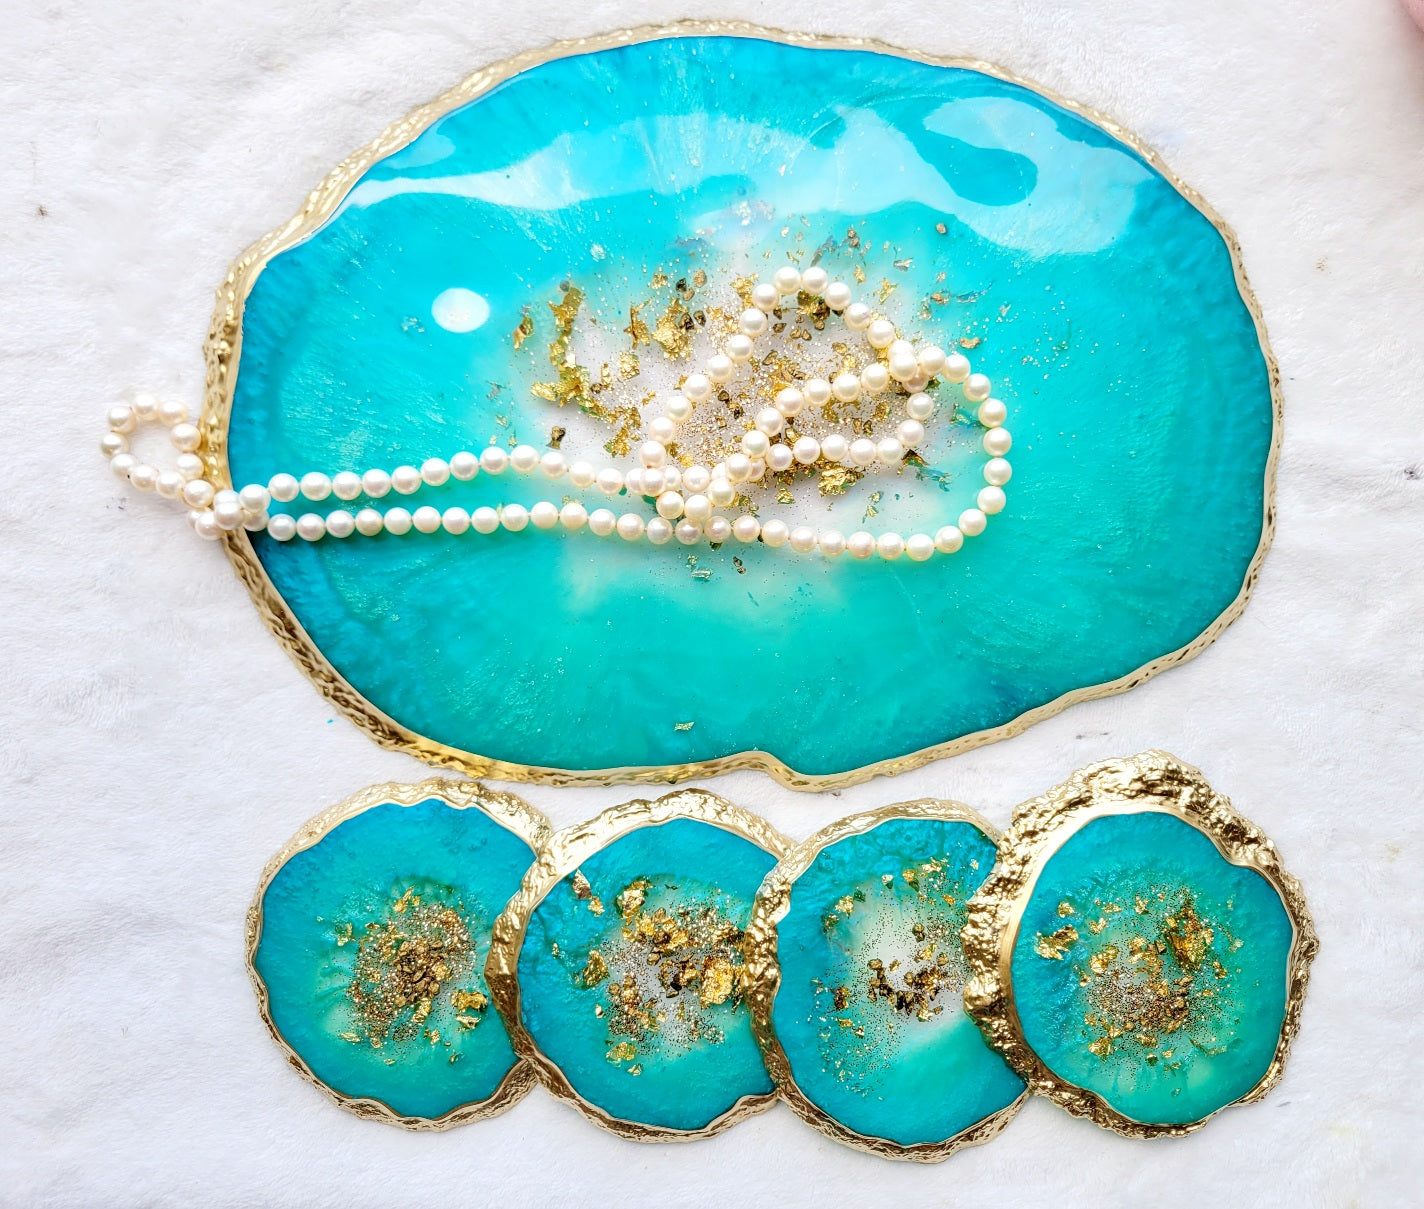 Teal Agate Vanity Decor Tray